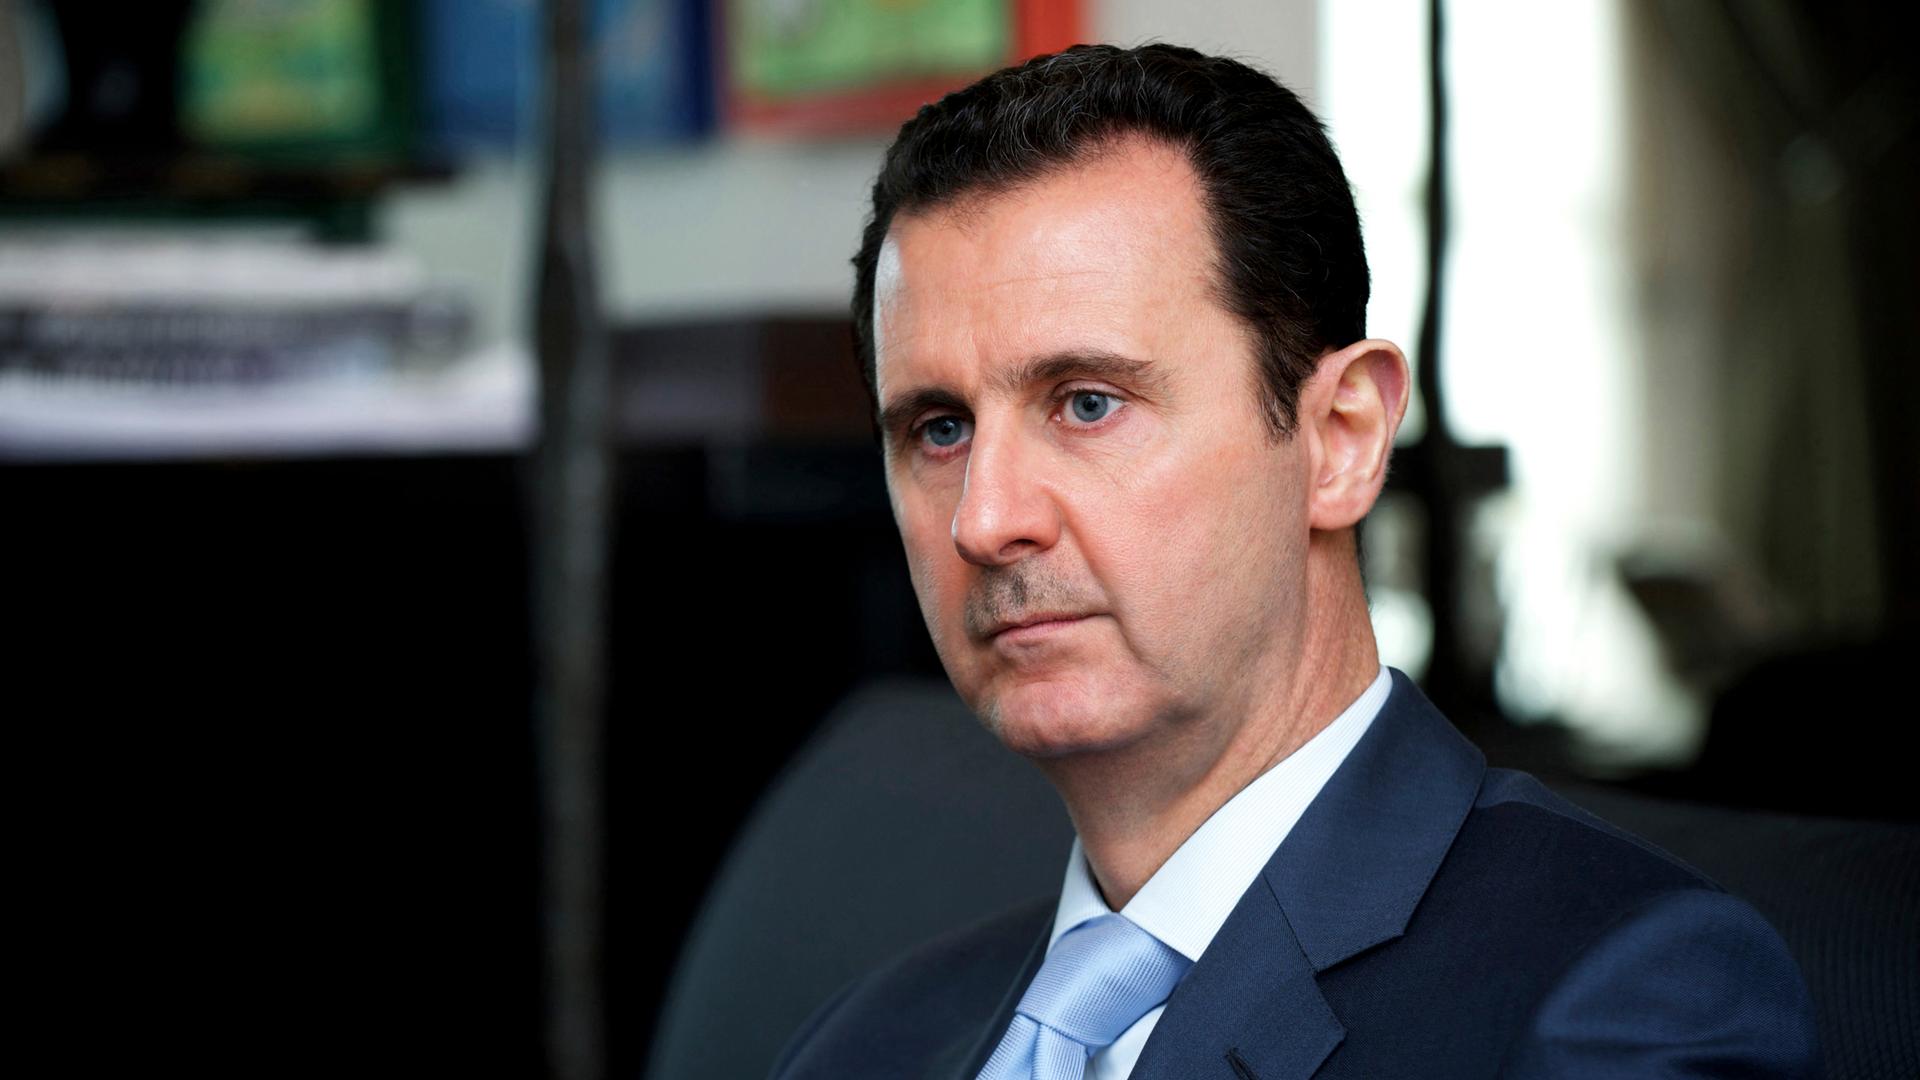 Syria's President Bashar al-Assad is seen during an interview in Damascus in January.